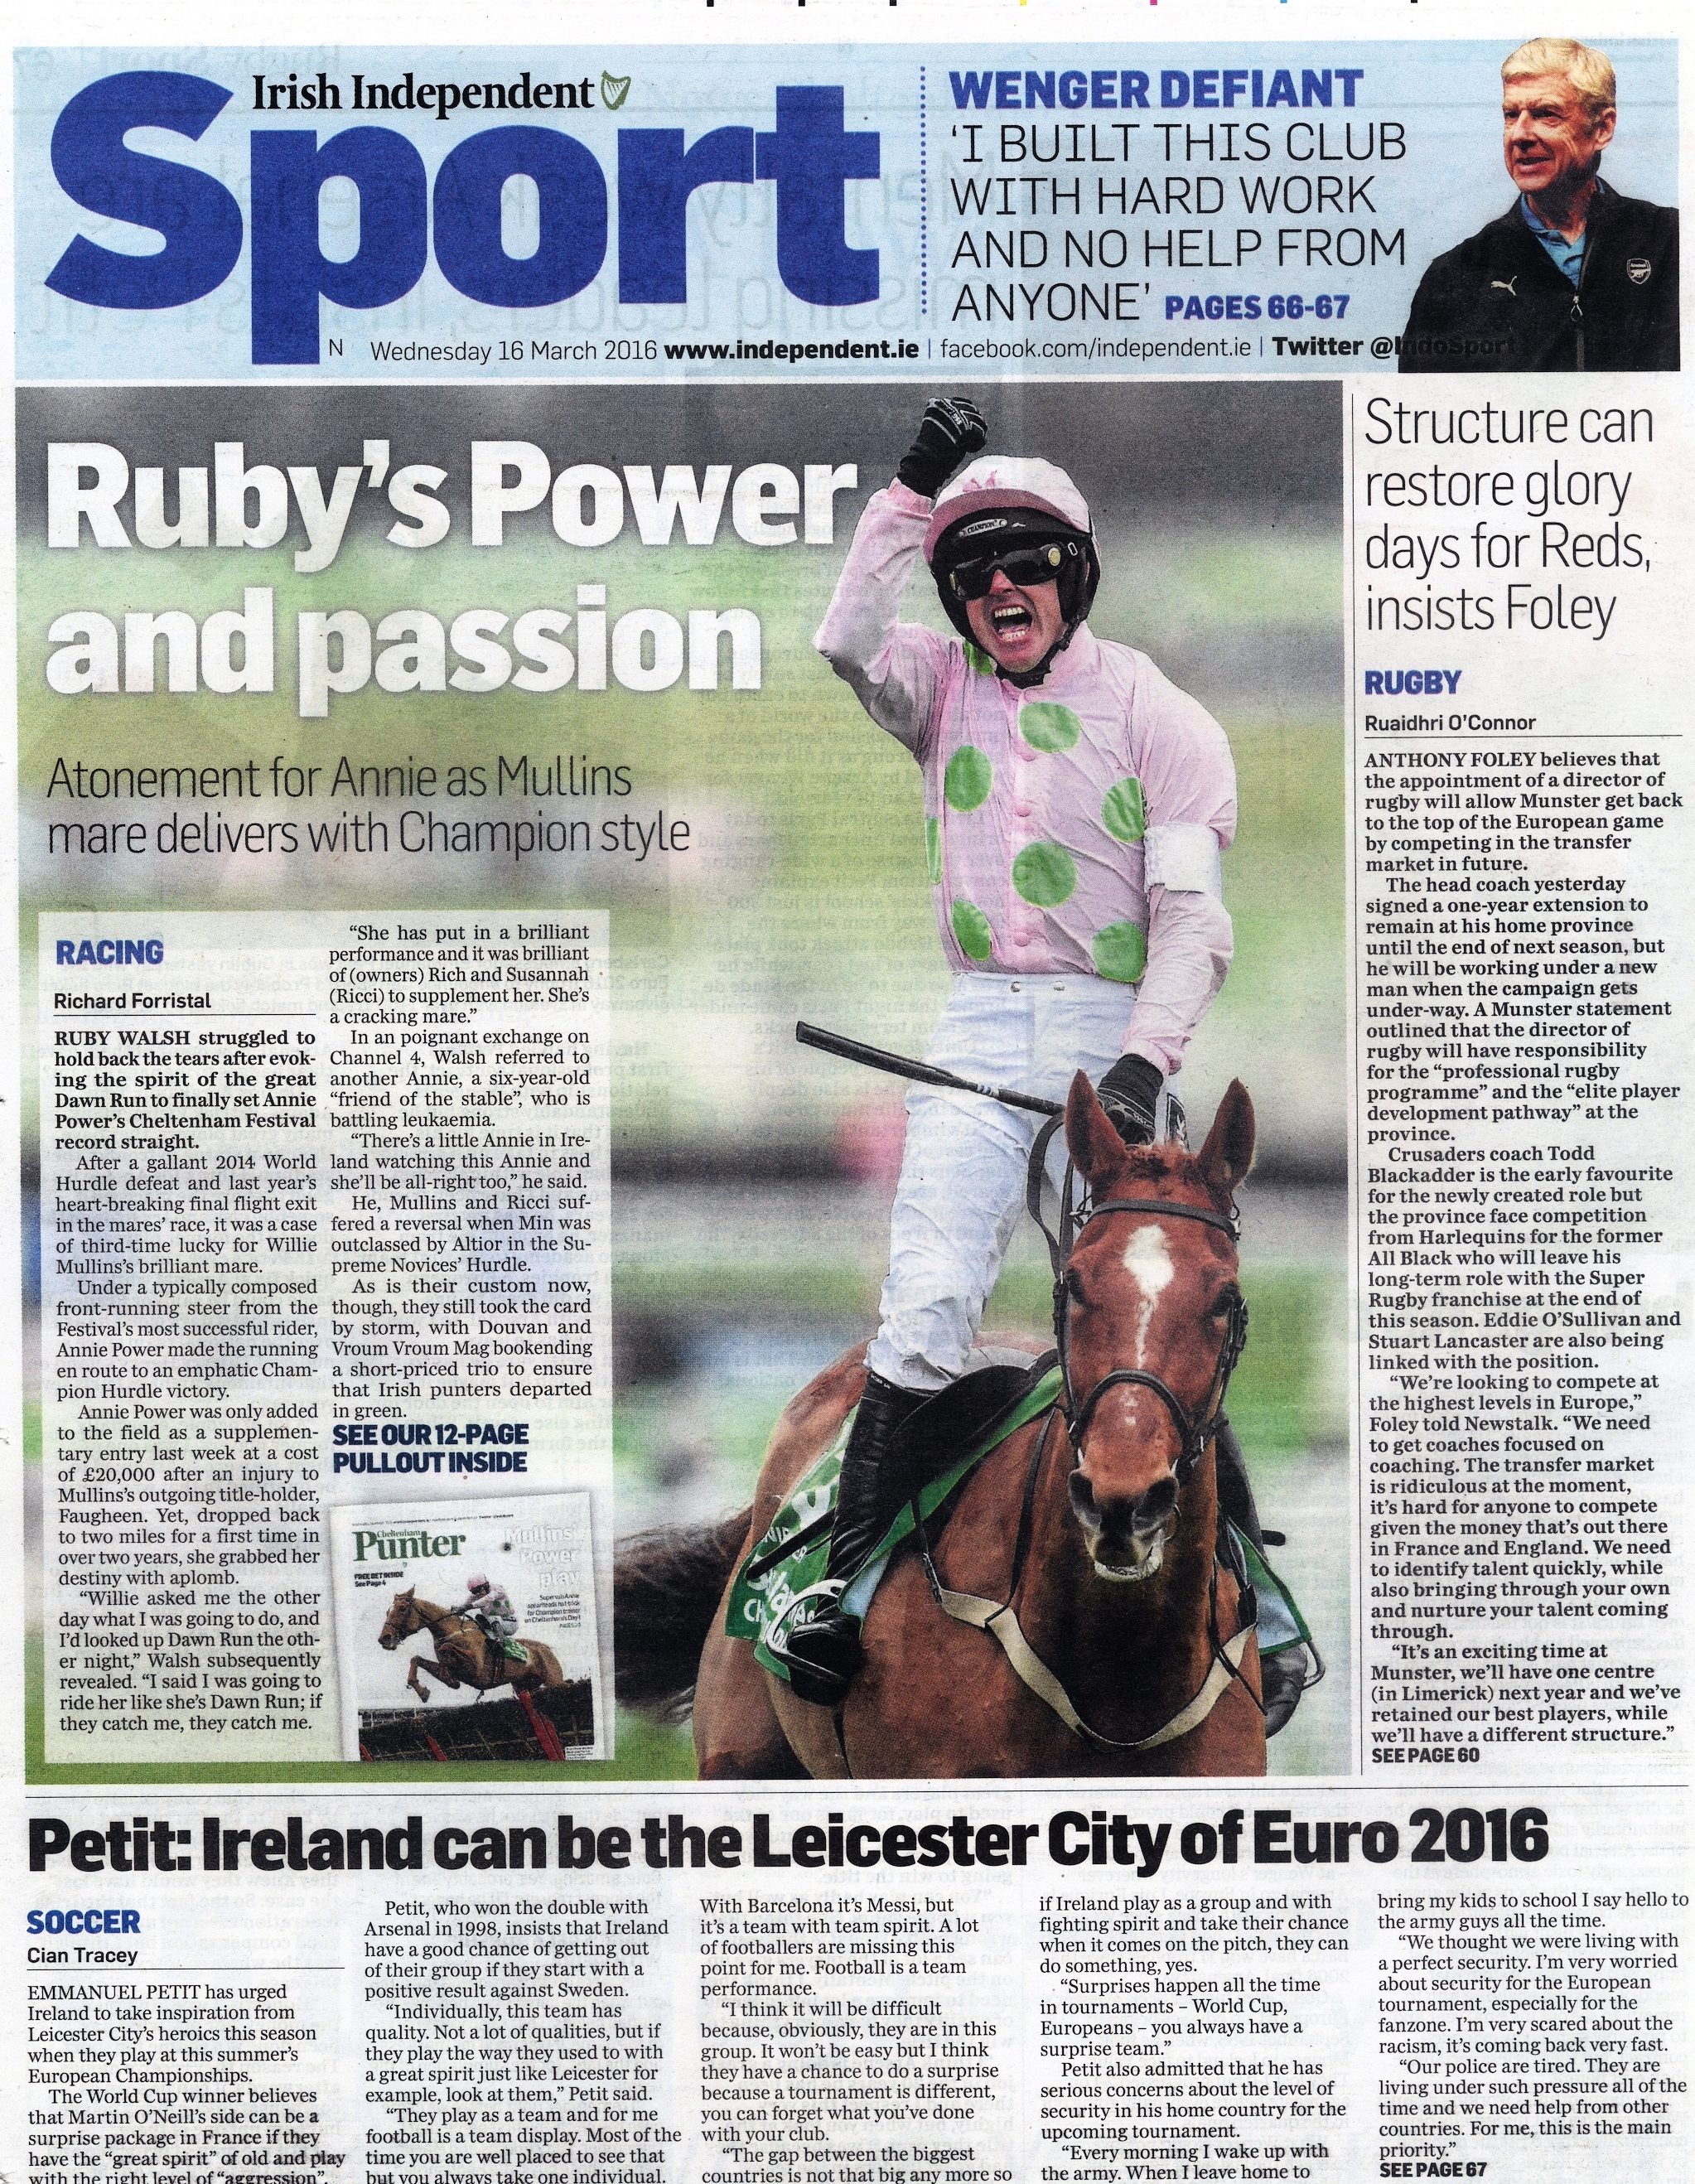  Ruby Walsh celebrates winning the Champion Hurdle on Annie Power during The Cheltenham Festival &nbsp; March 16 2016  Irish Independent  